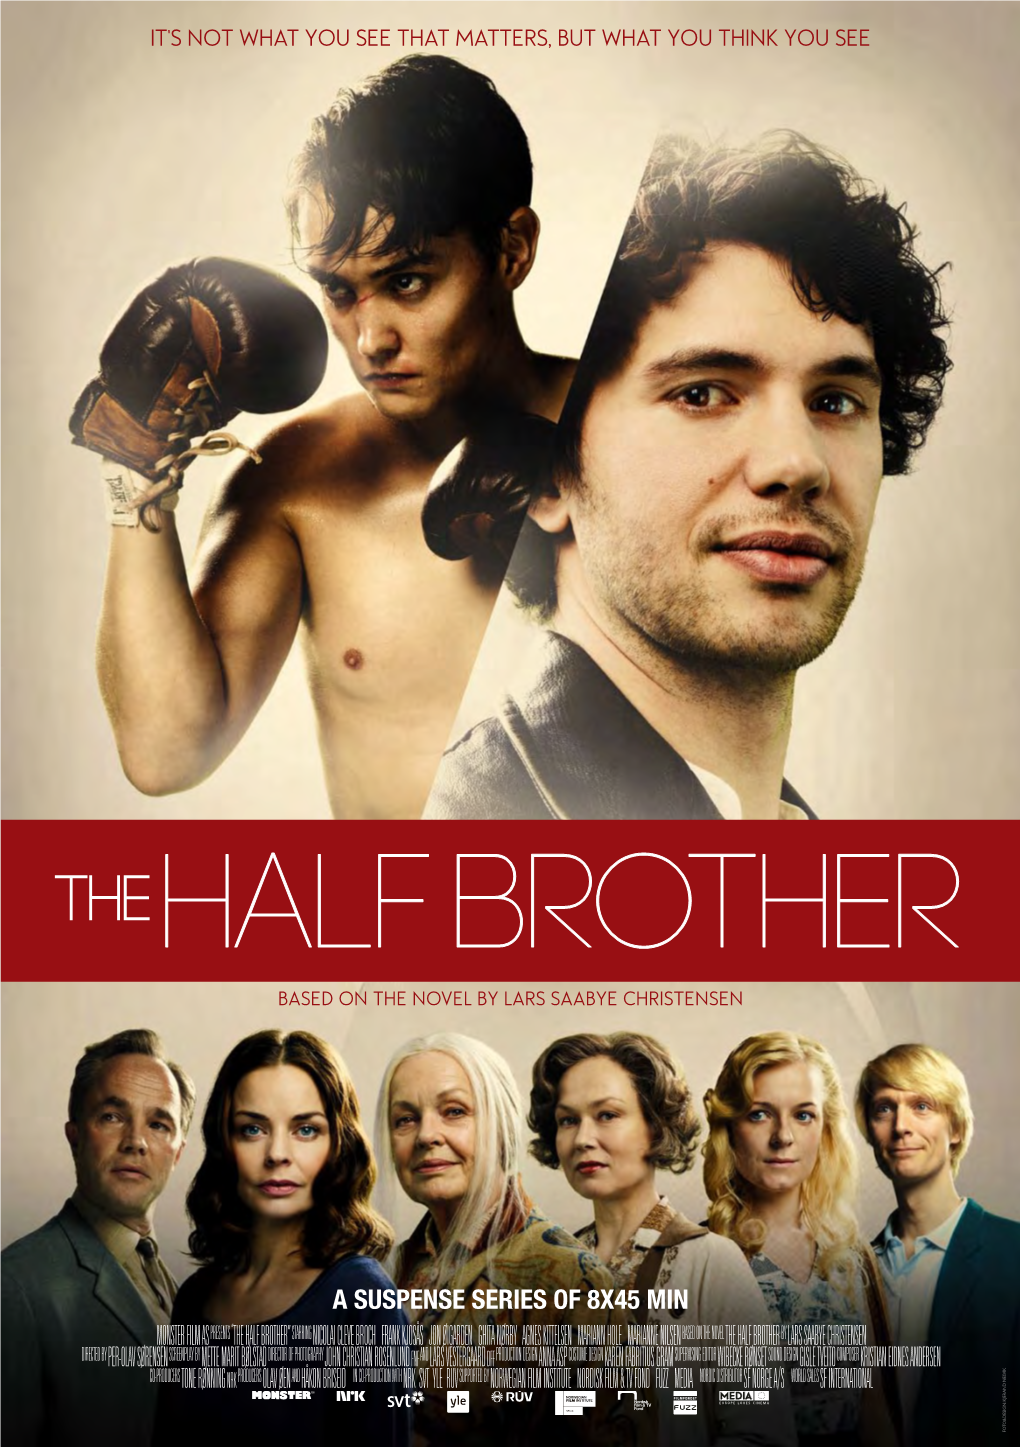 “The Half Brother”Starring Nicolai Cleve Broch Frank